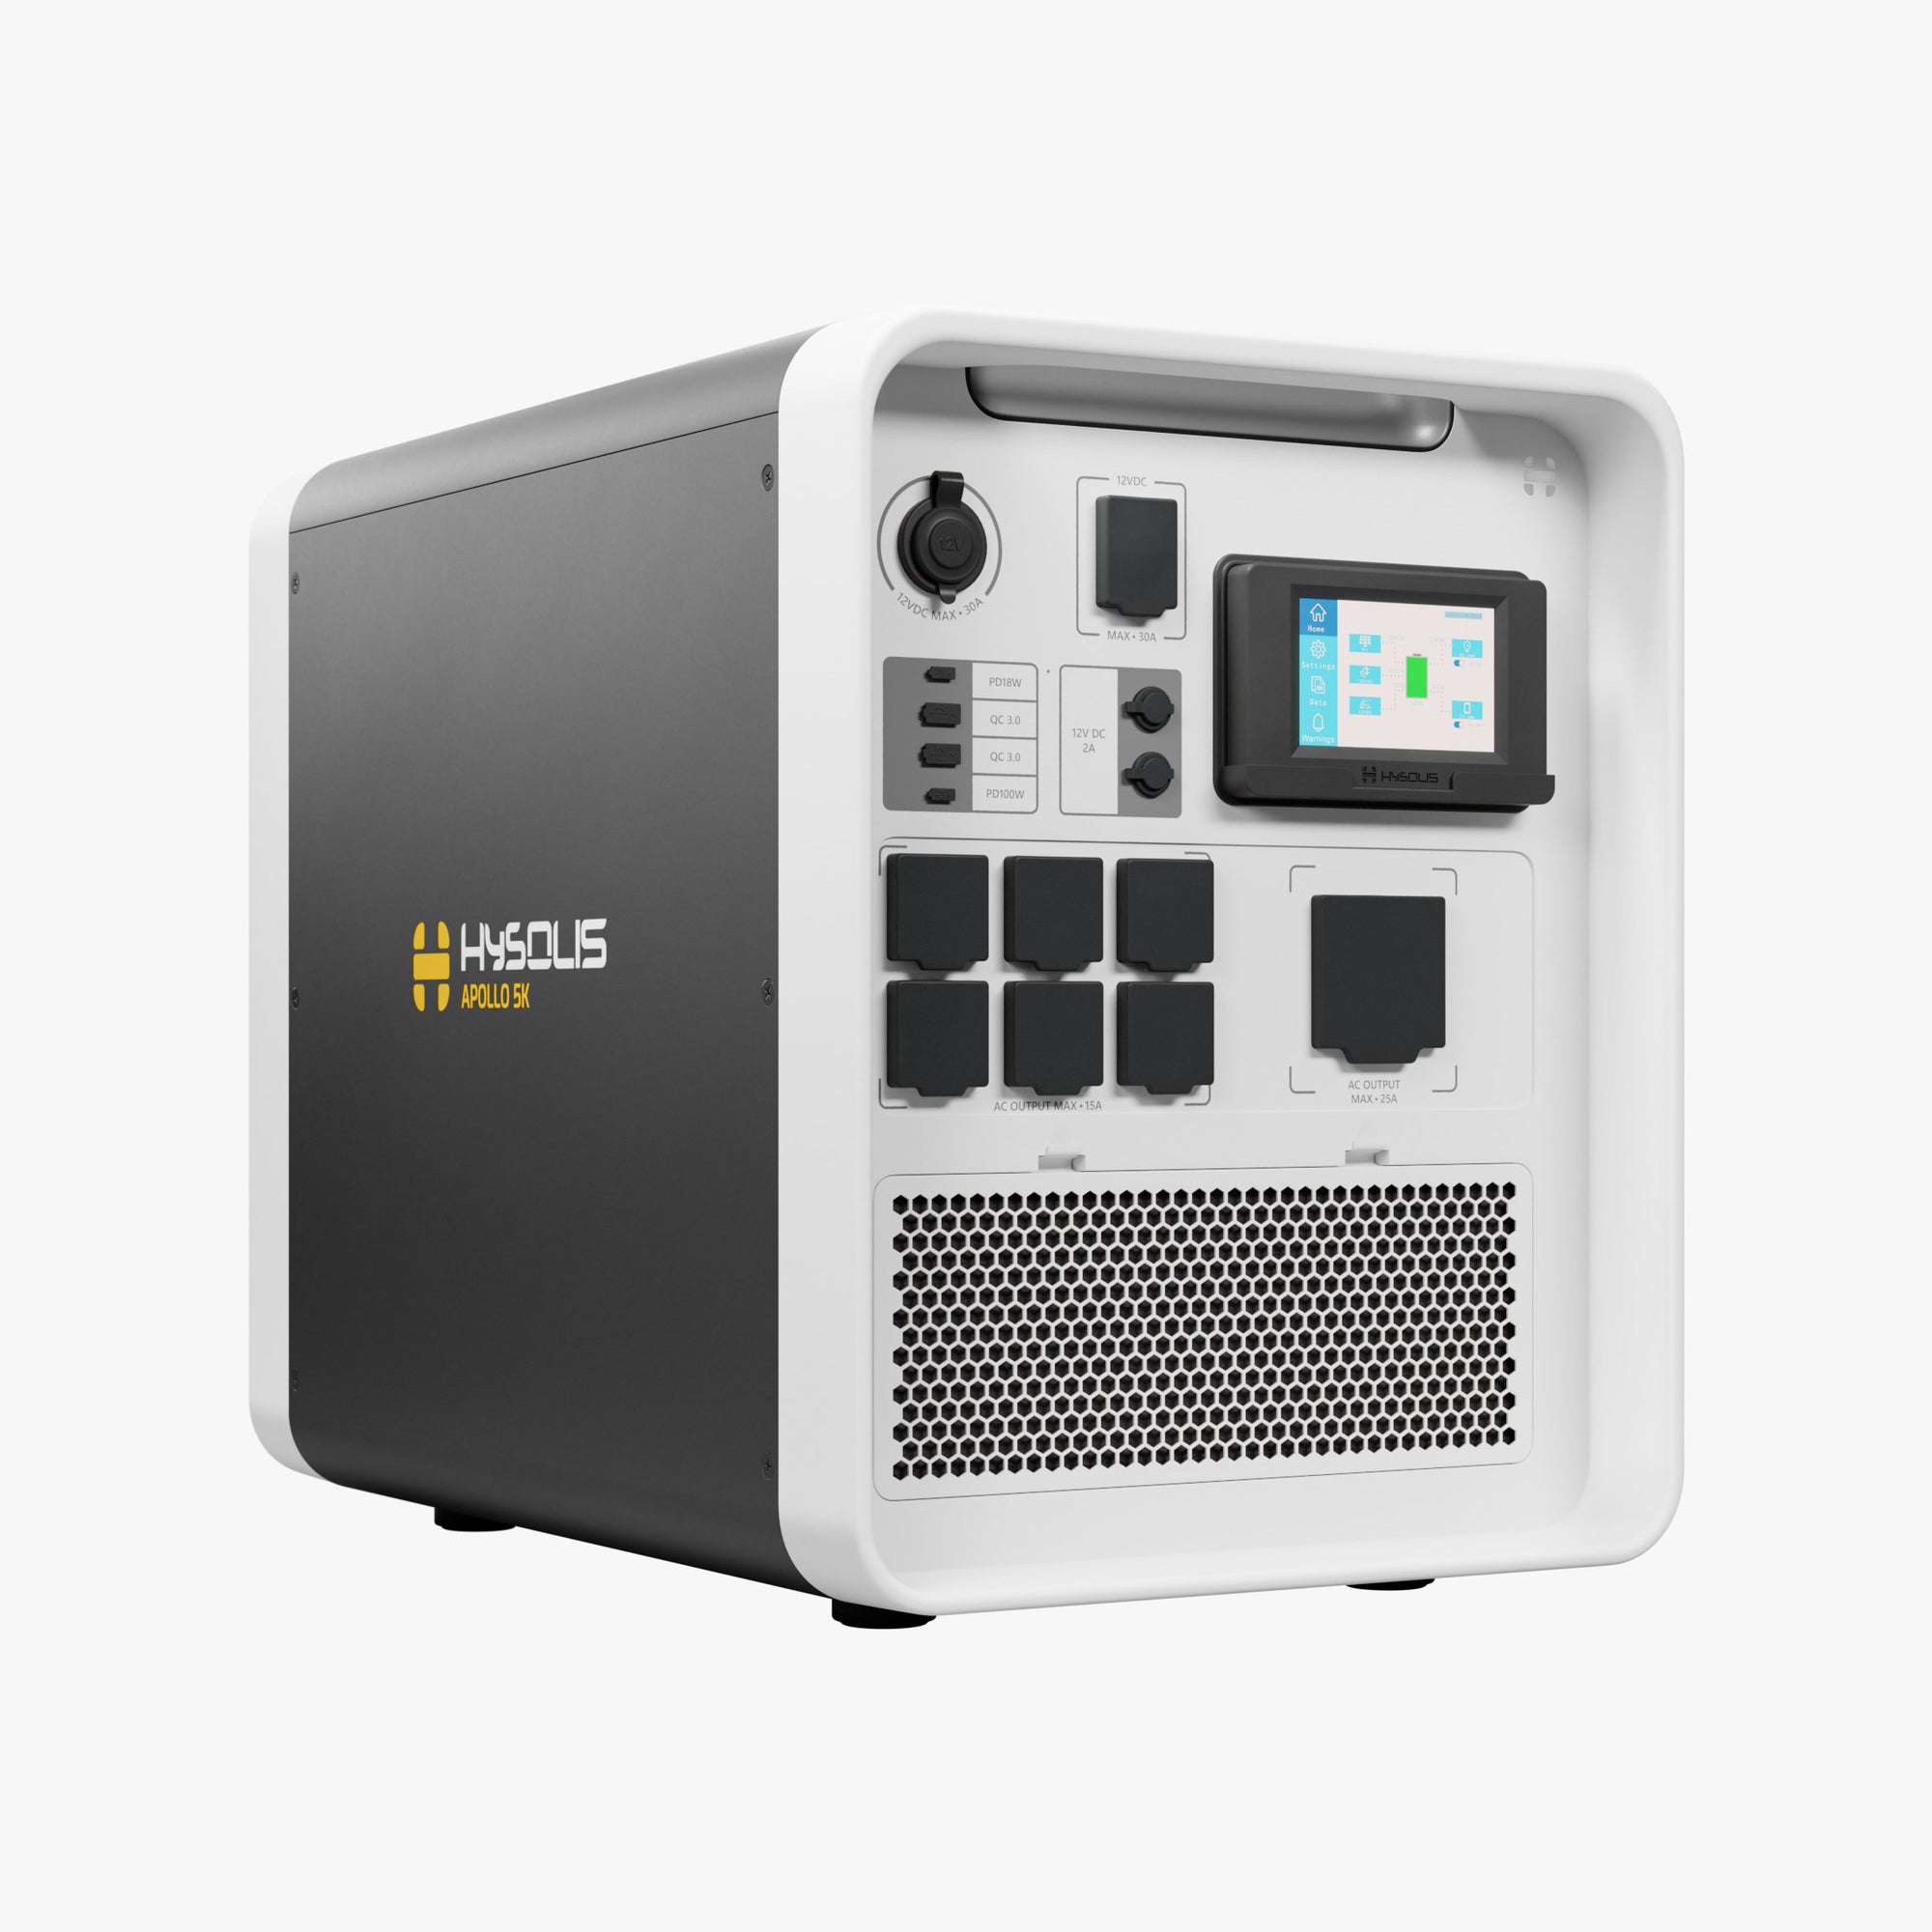 Hysolis MPS 4500wH / 3000W Solar Generator Lithium Battery All-In-One Power  Station, Free Shipping & NO US SALES TAX!